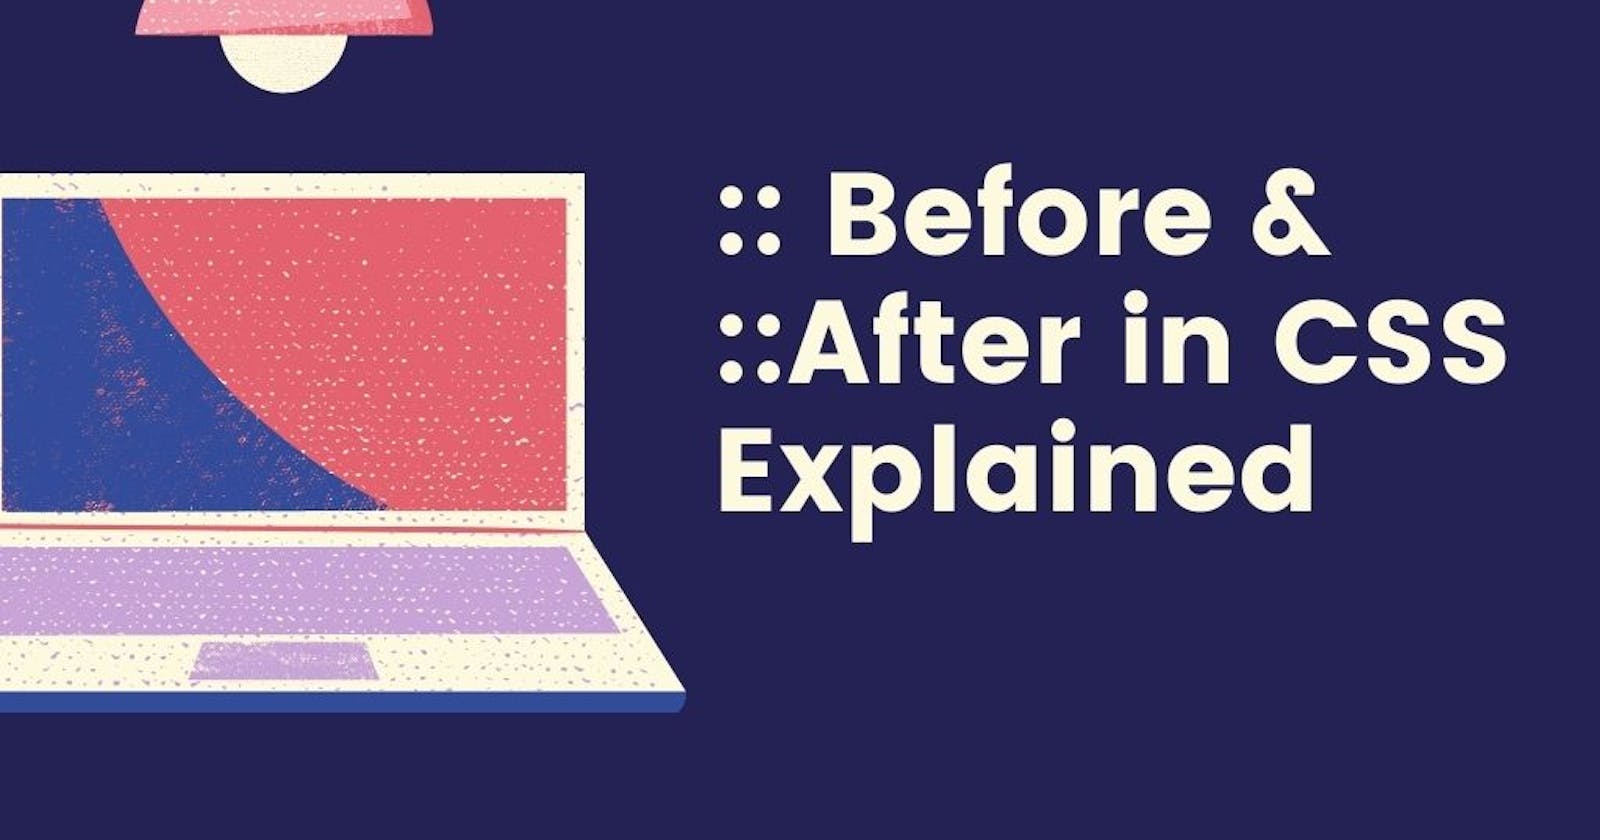 :: before & ::after in CSS Explained